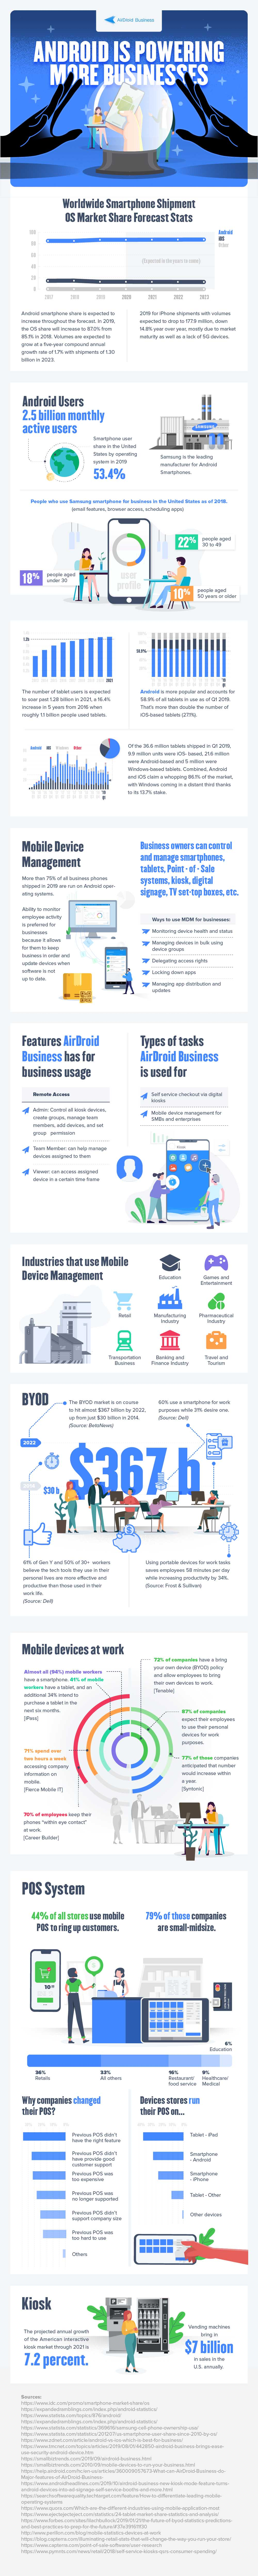 Mobile Device Management: Android is Powering More Businesses